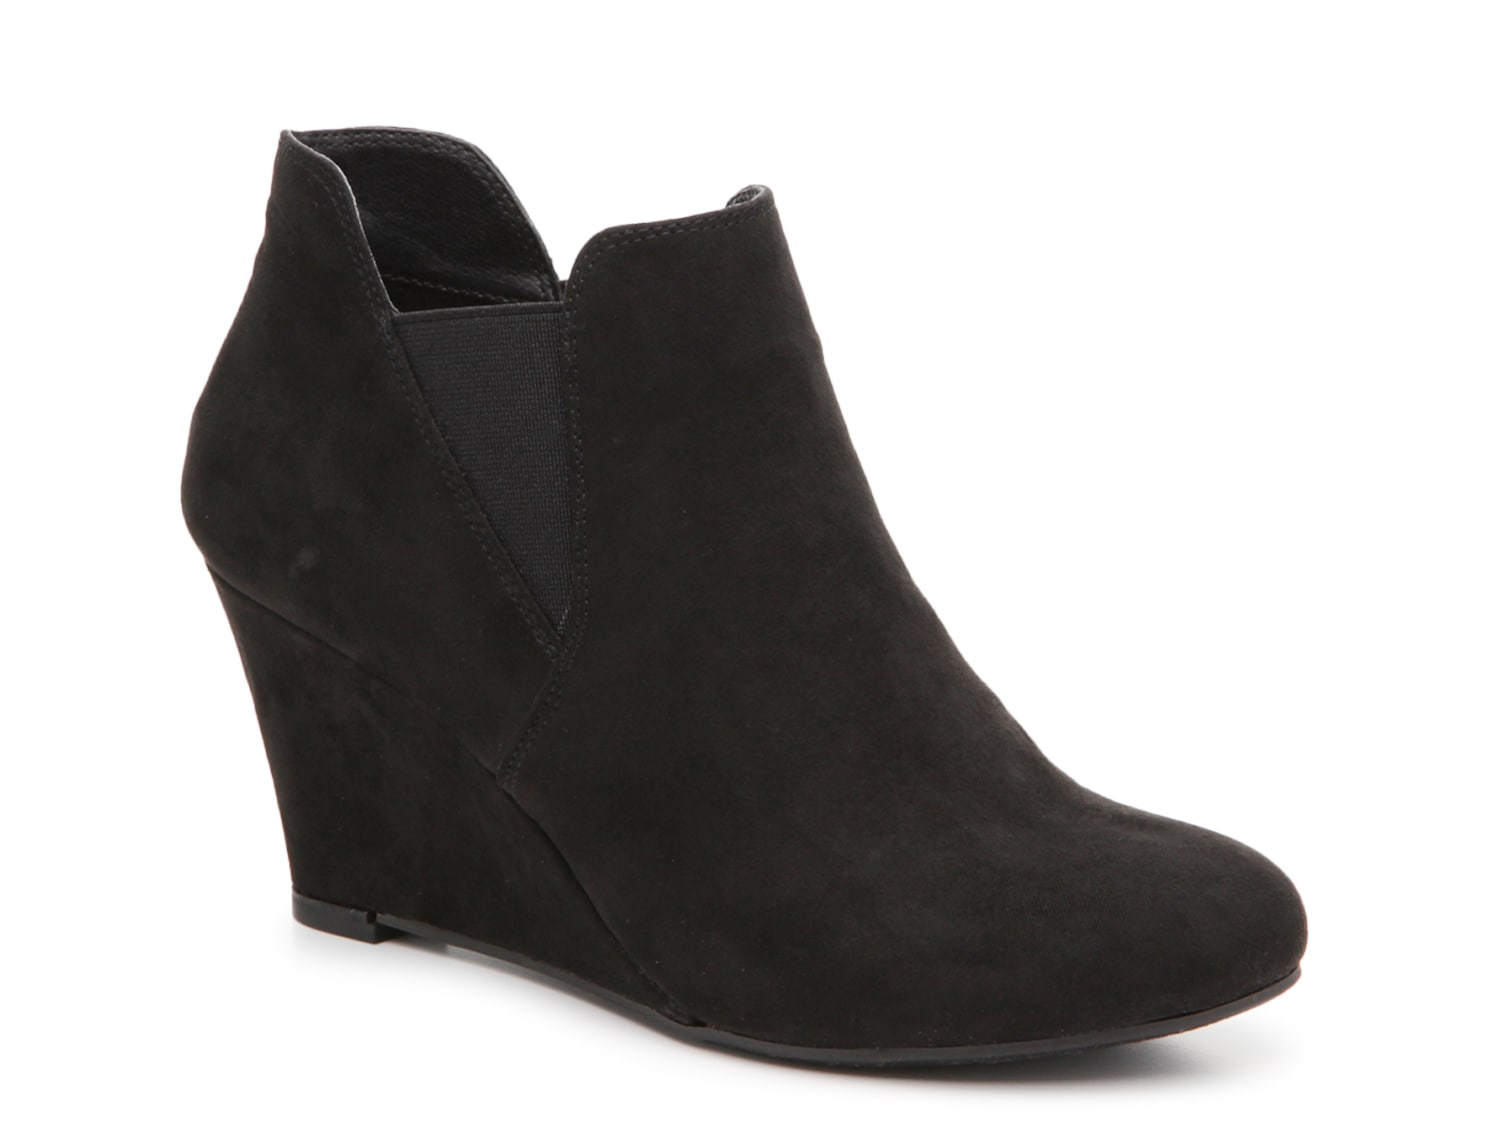 Madeline Priceless Wedge Bootie - Free Shipping | DSW